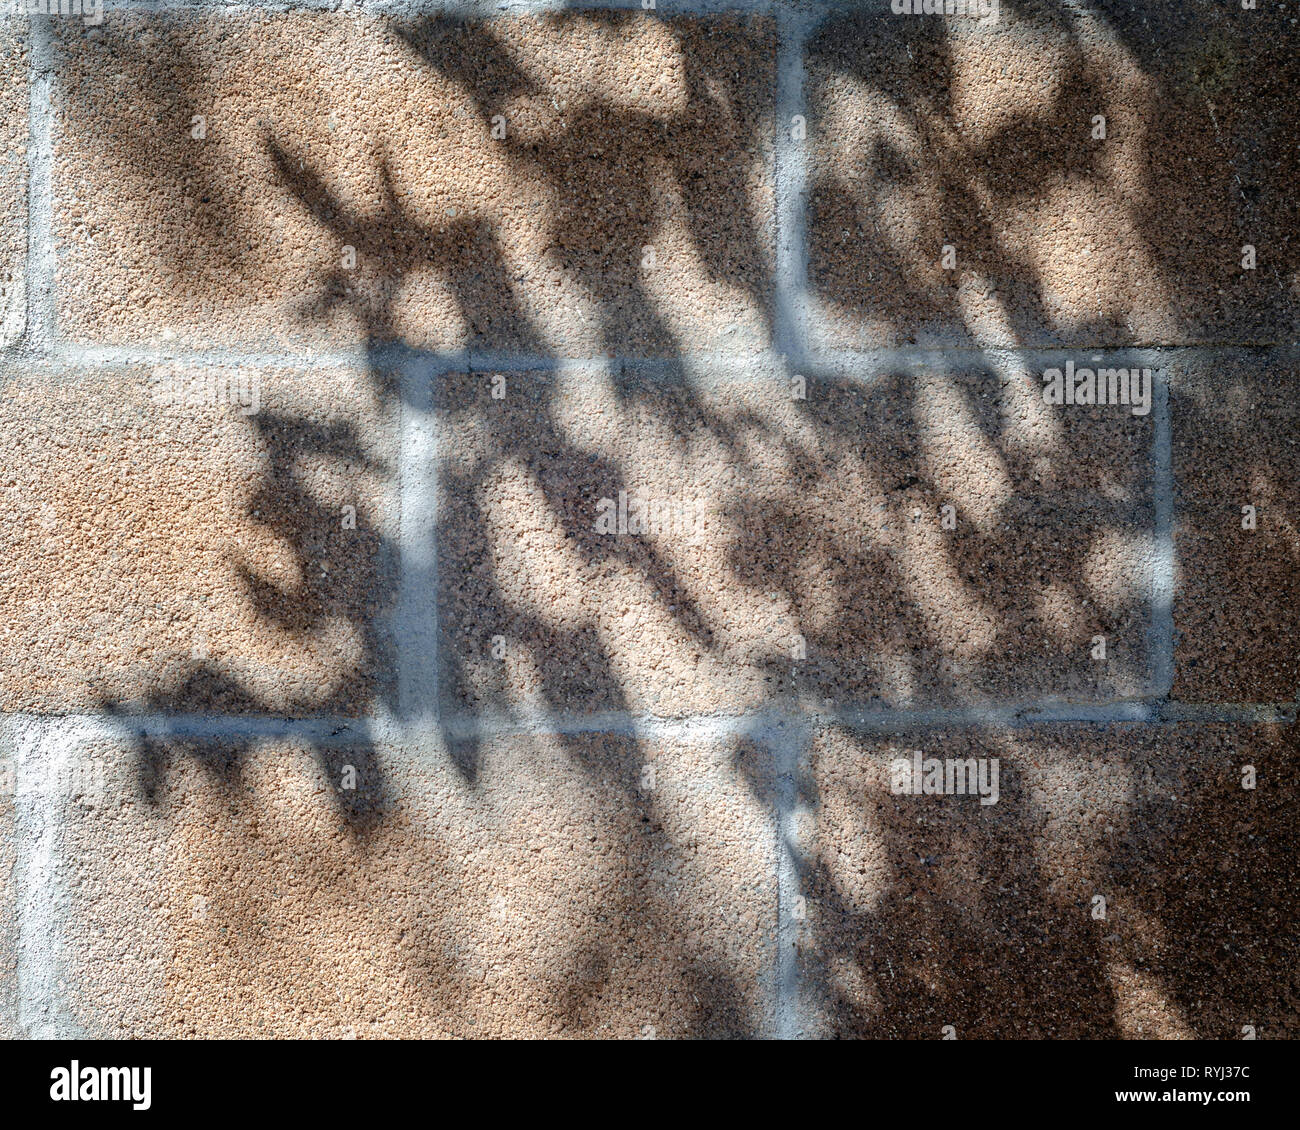 Close-up of cinder block wall with leaf shadows on surface. Stock Photo